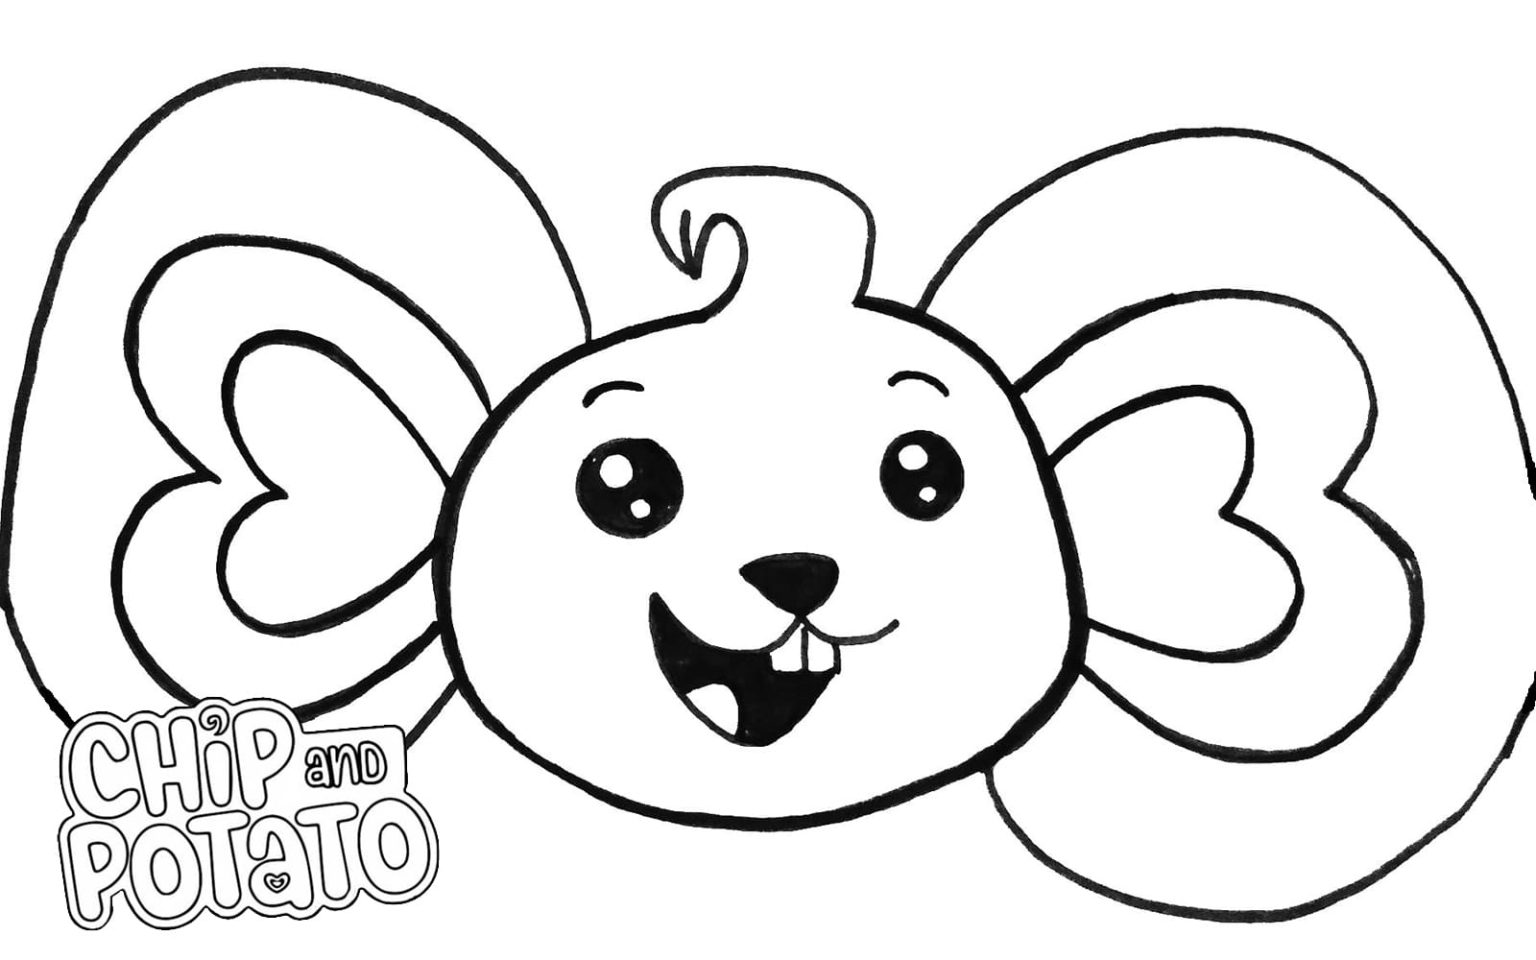 Chip and Potato Coloring Pages - Printbale coloring pages